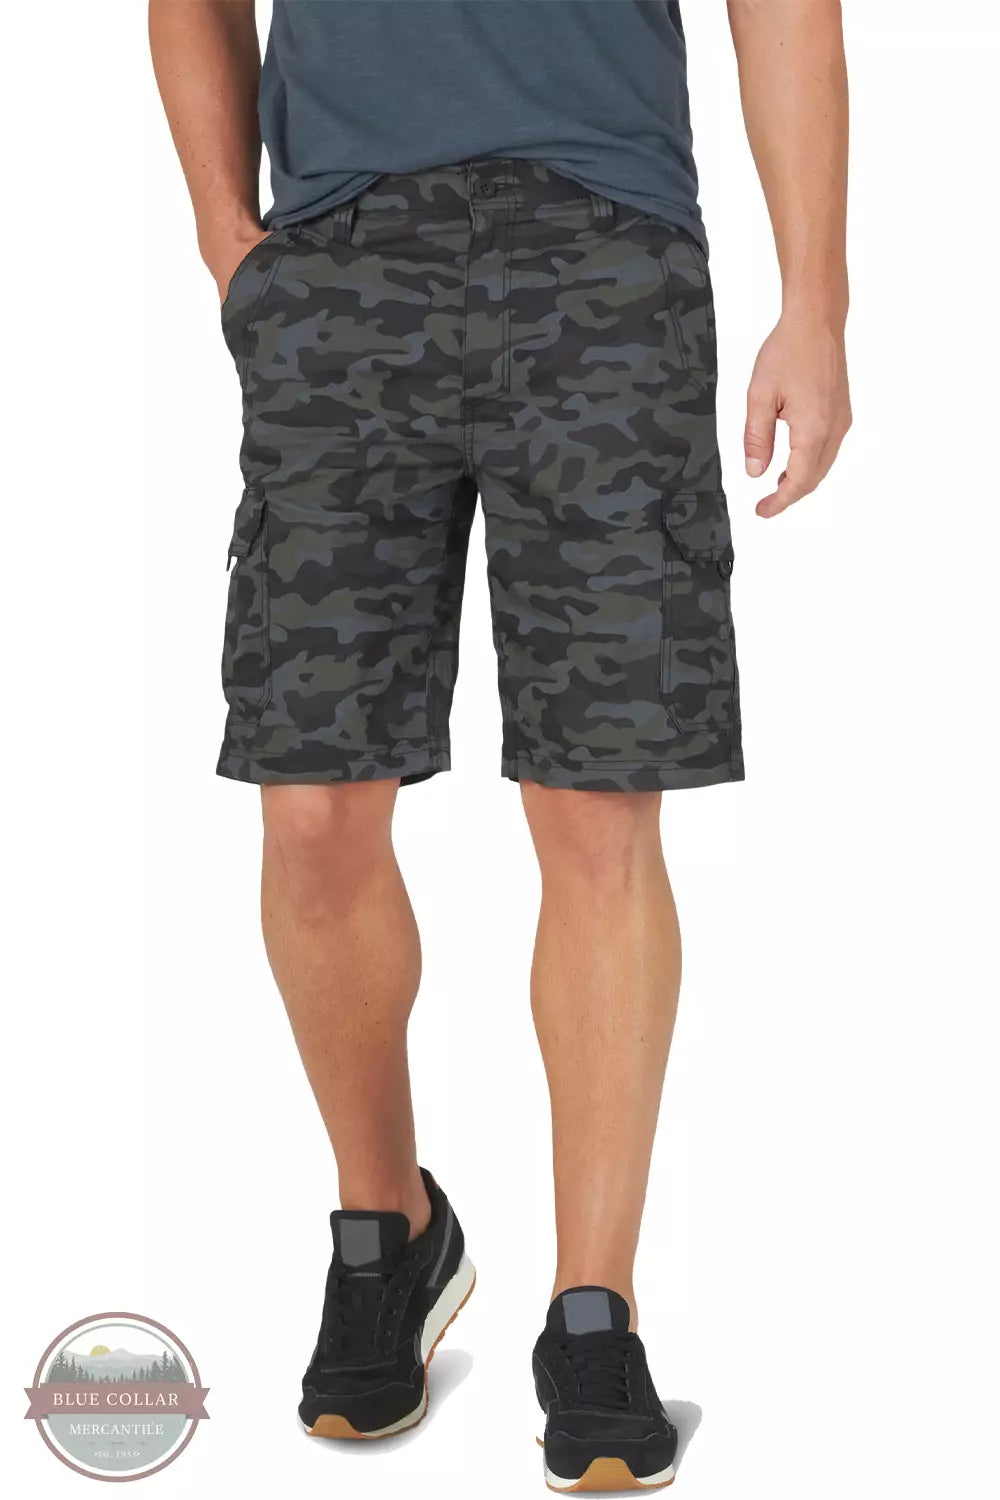 Lee 112314445 Extreme Motion Crossroad Cargo Shorts Front View